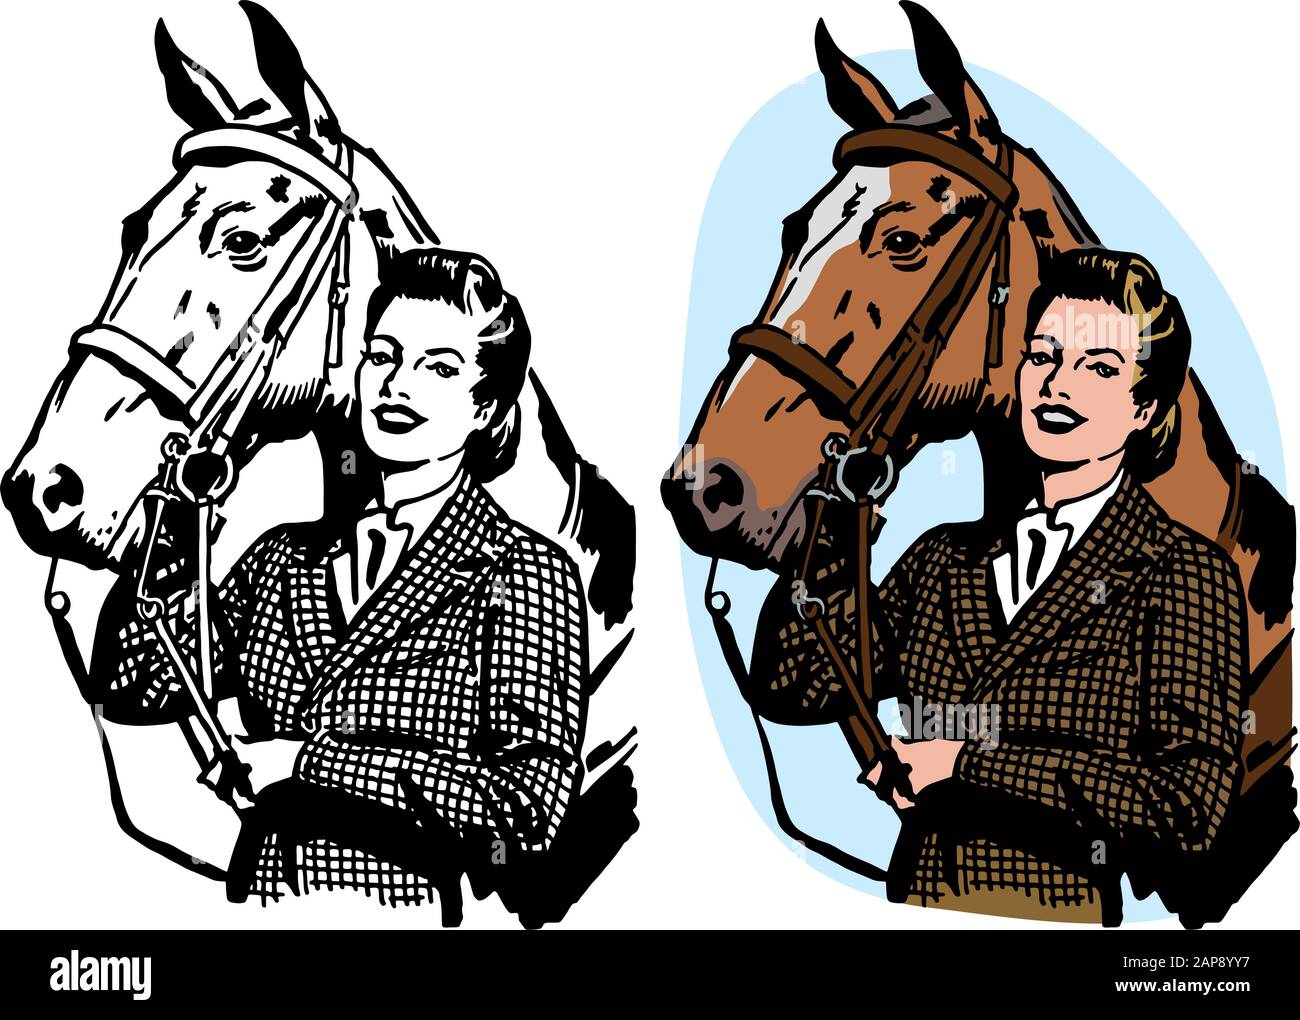 An equestrian woman and her horse. Stock Vector